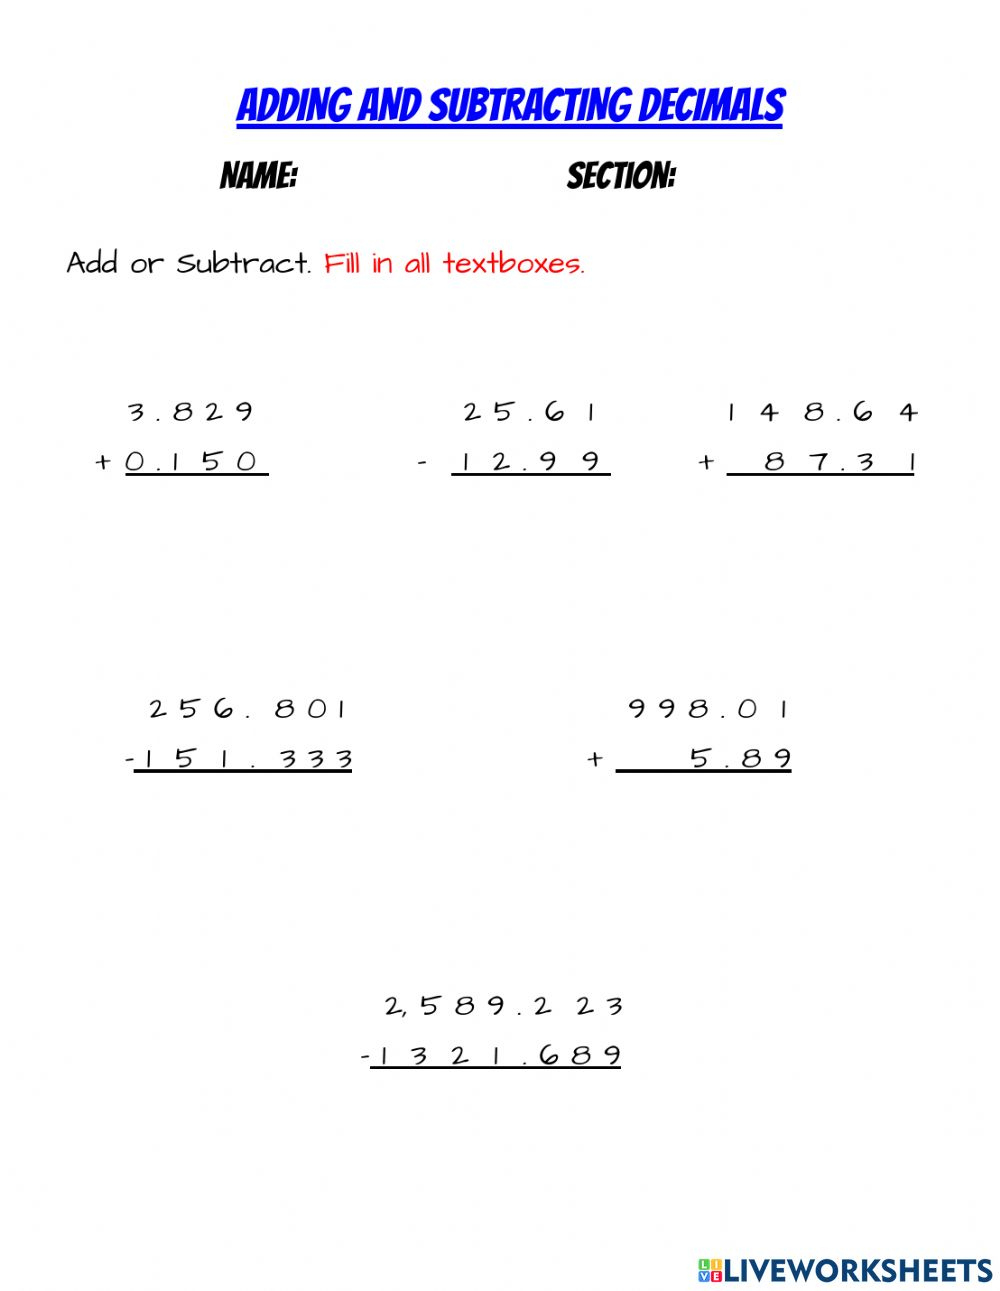 Adding And Subtracting Decimals Activity For 5th Grade